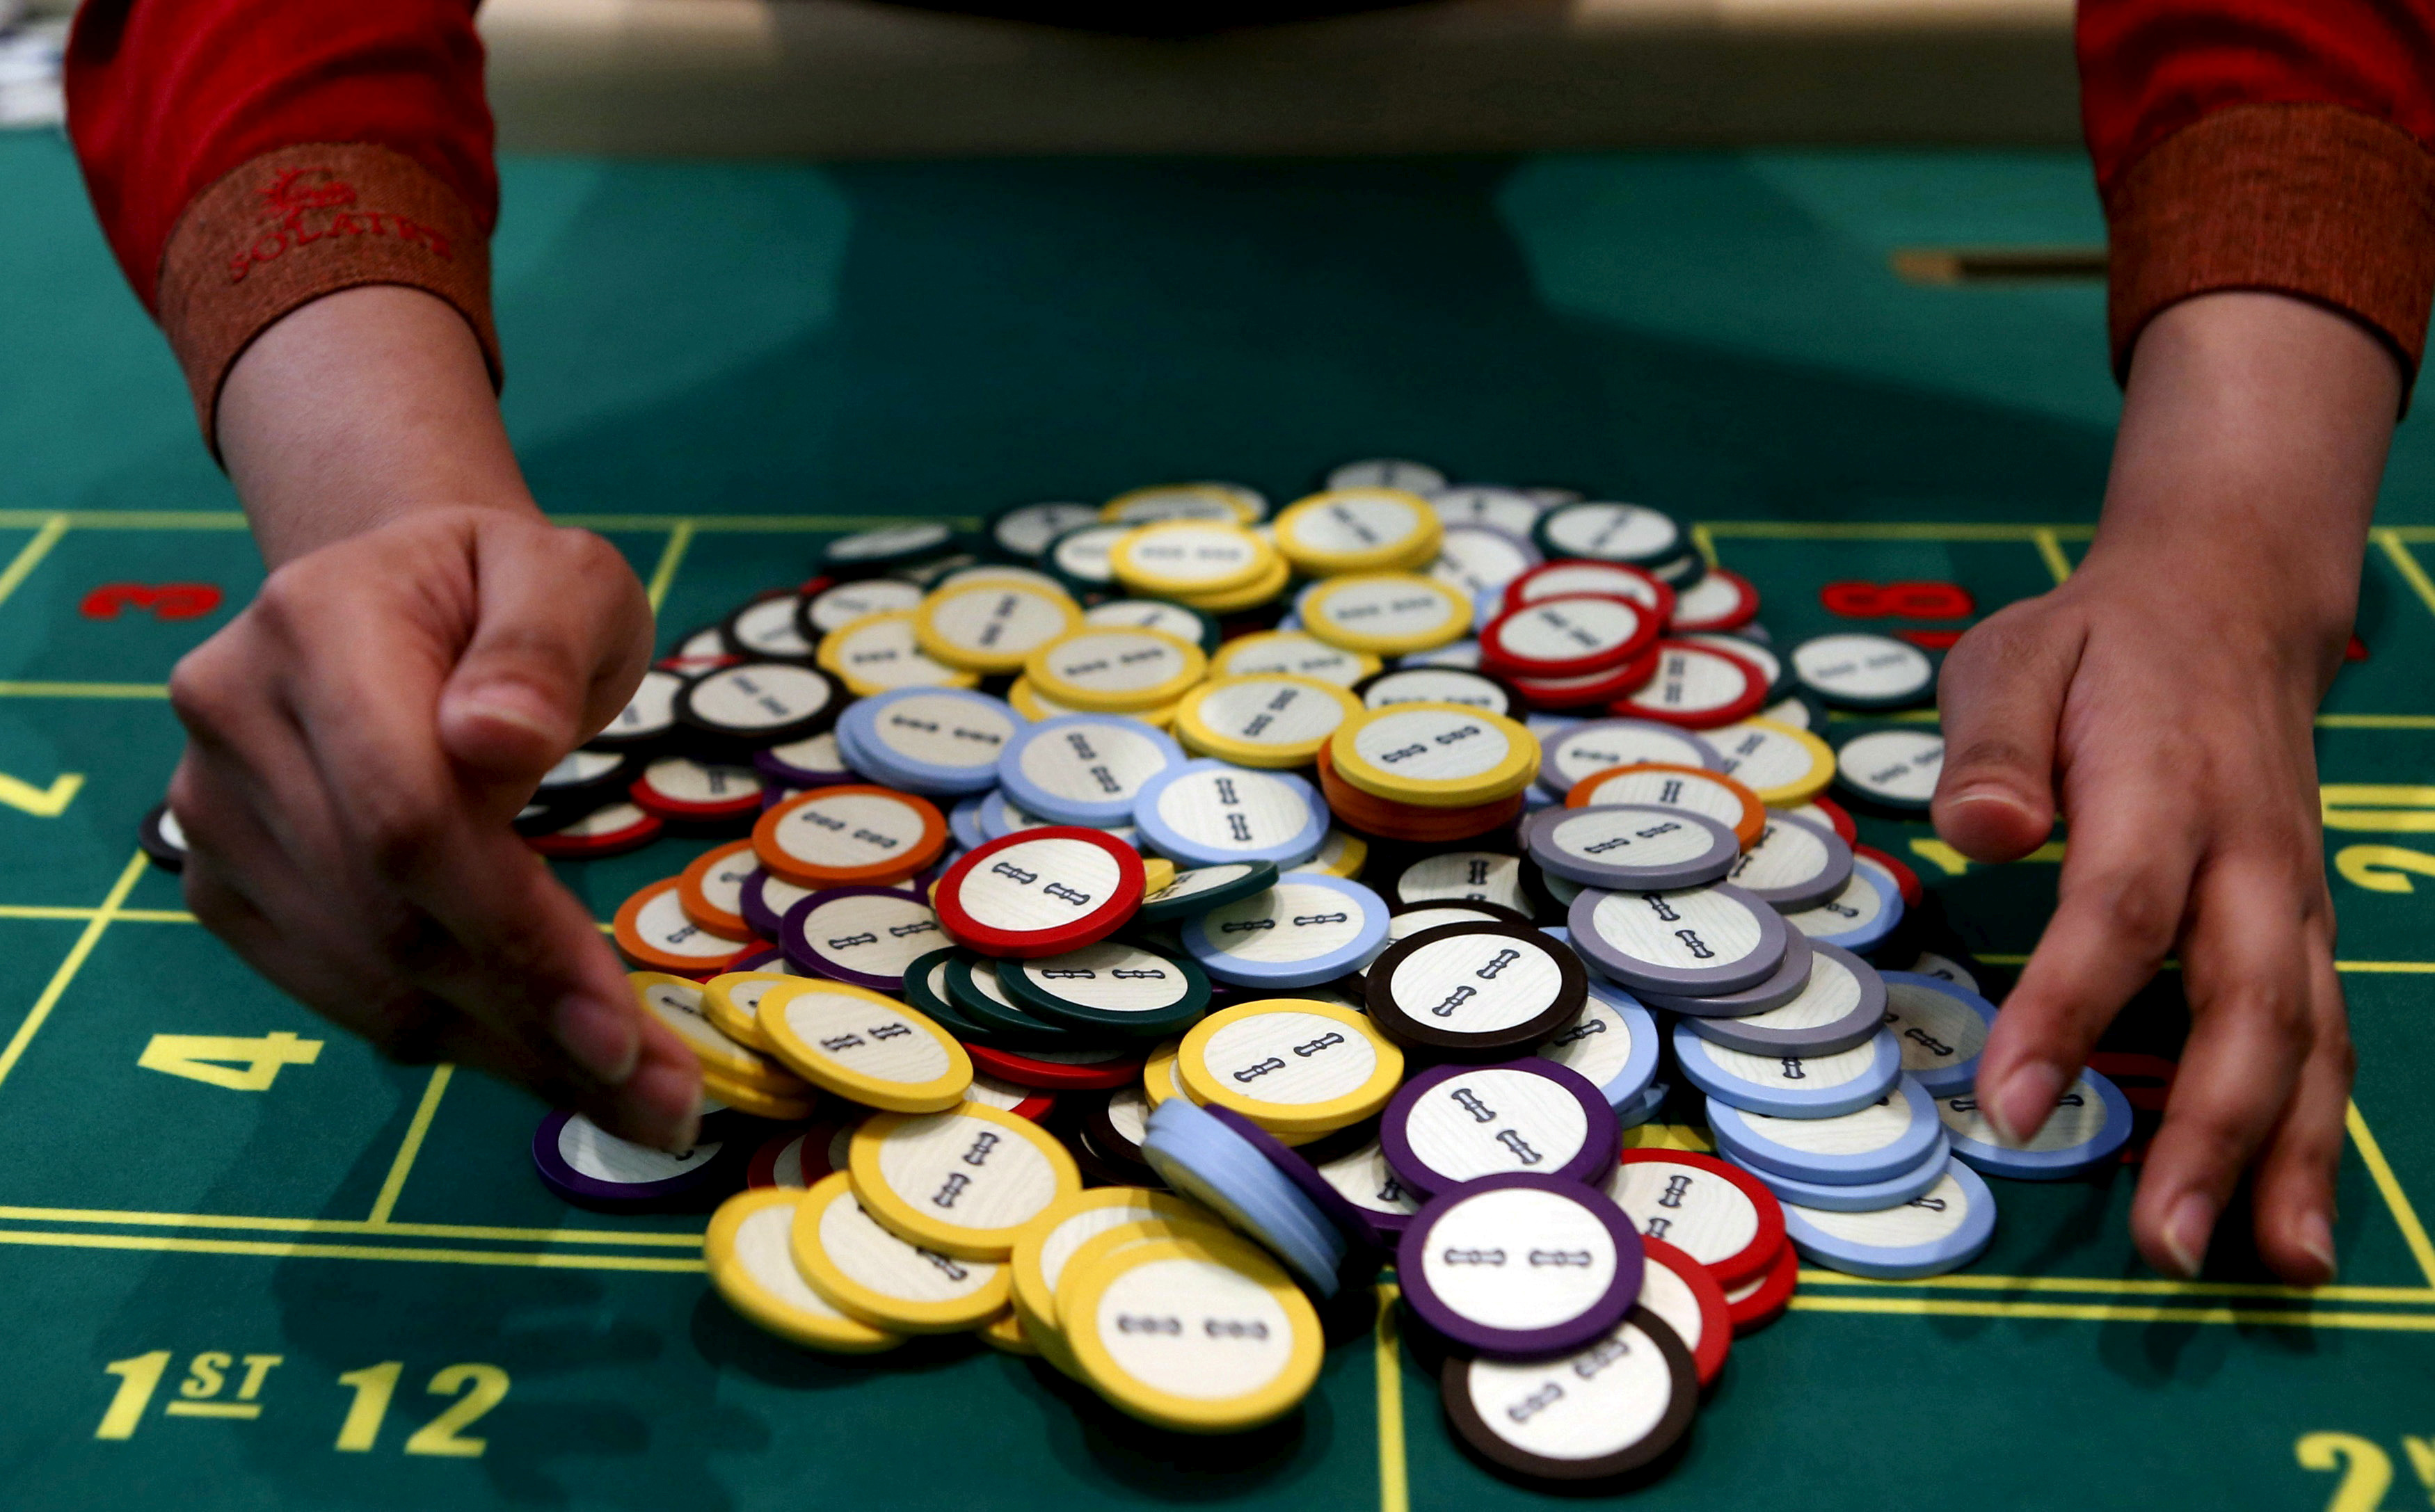 A casino dealer collects chips at a roulette table in Pasay city, Metro Manila